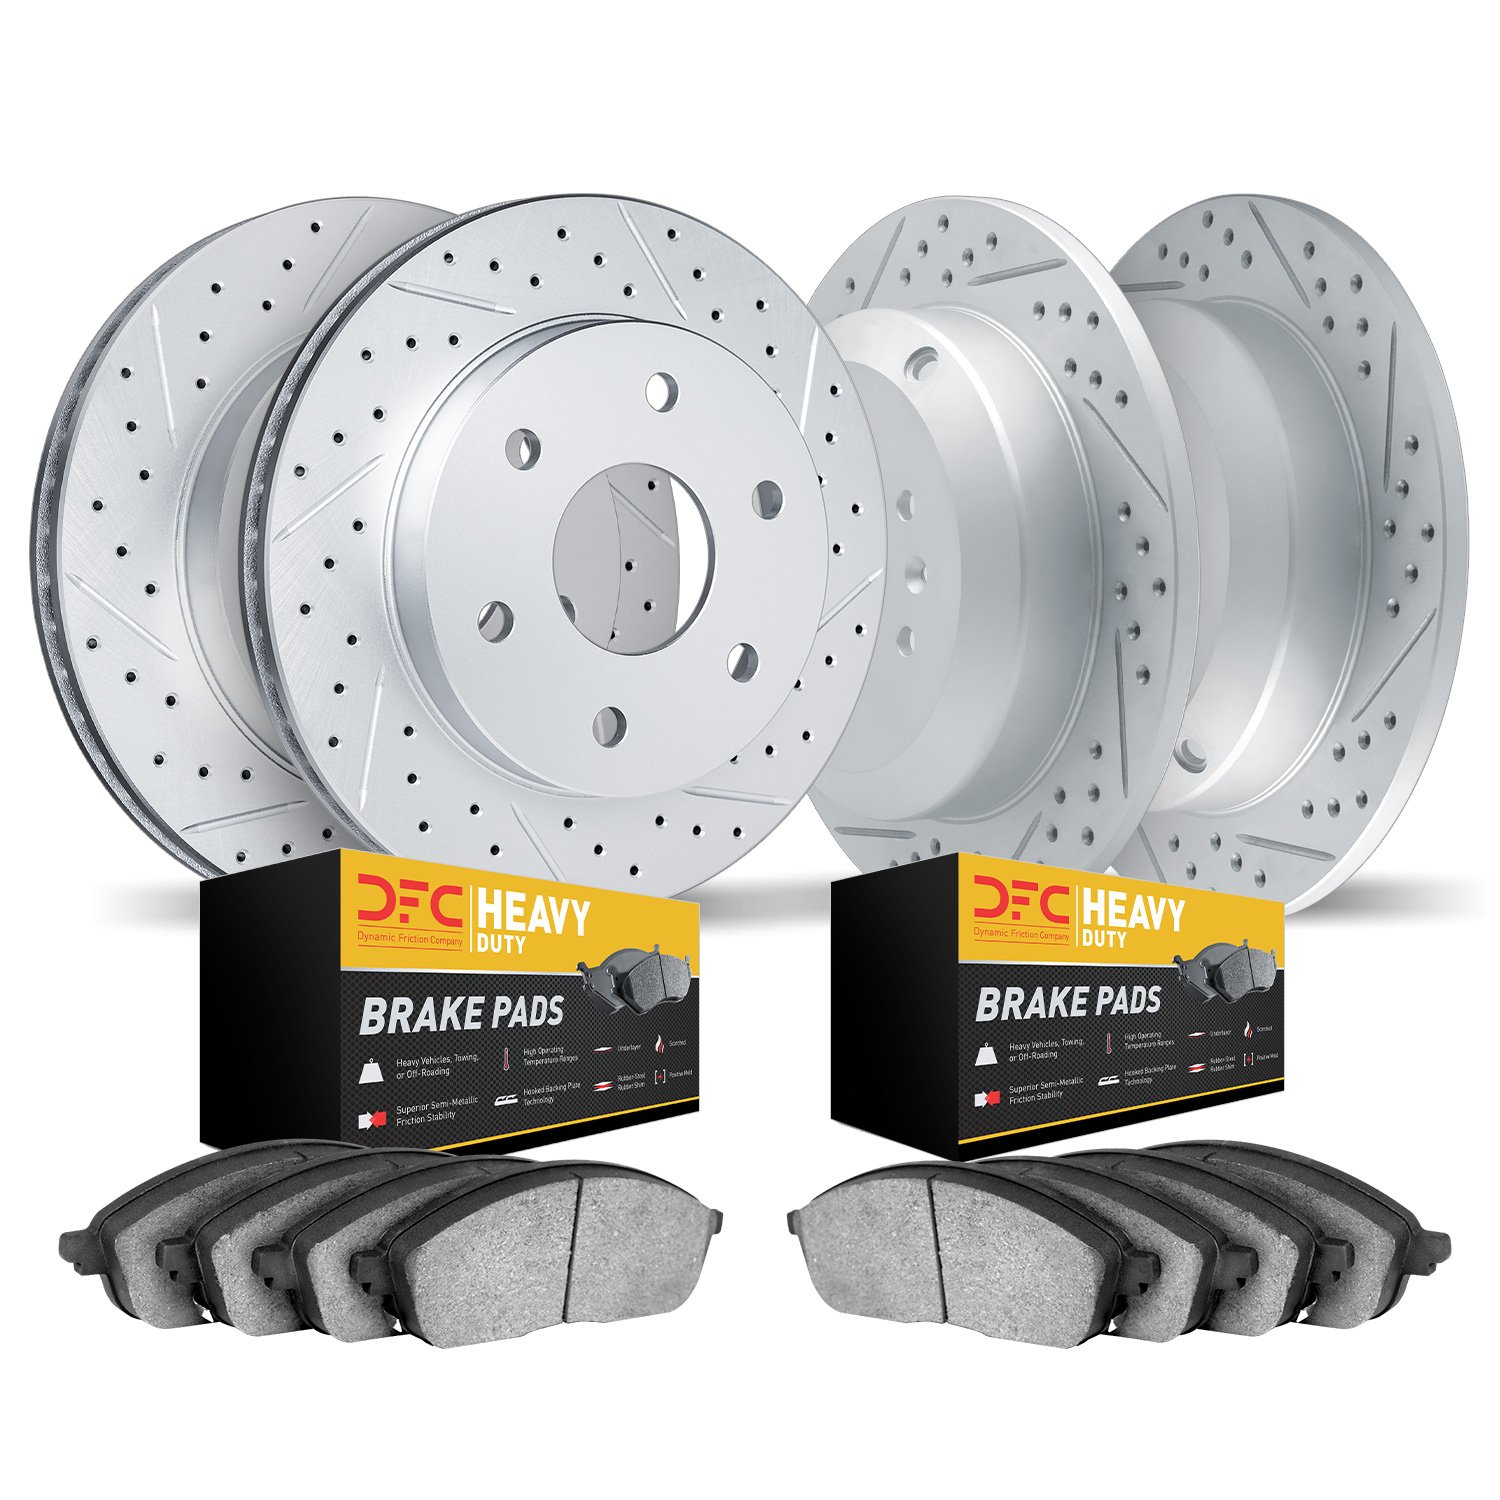 2204-40056 Geoperformance Drilled/Slotted Rotors w/Heavy-Duty Pads Kit, Fits Select Multiple Makes/Models, Position: Front and R